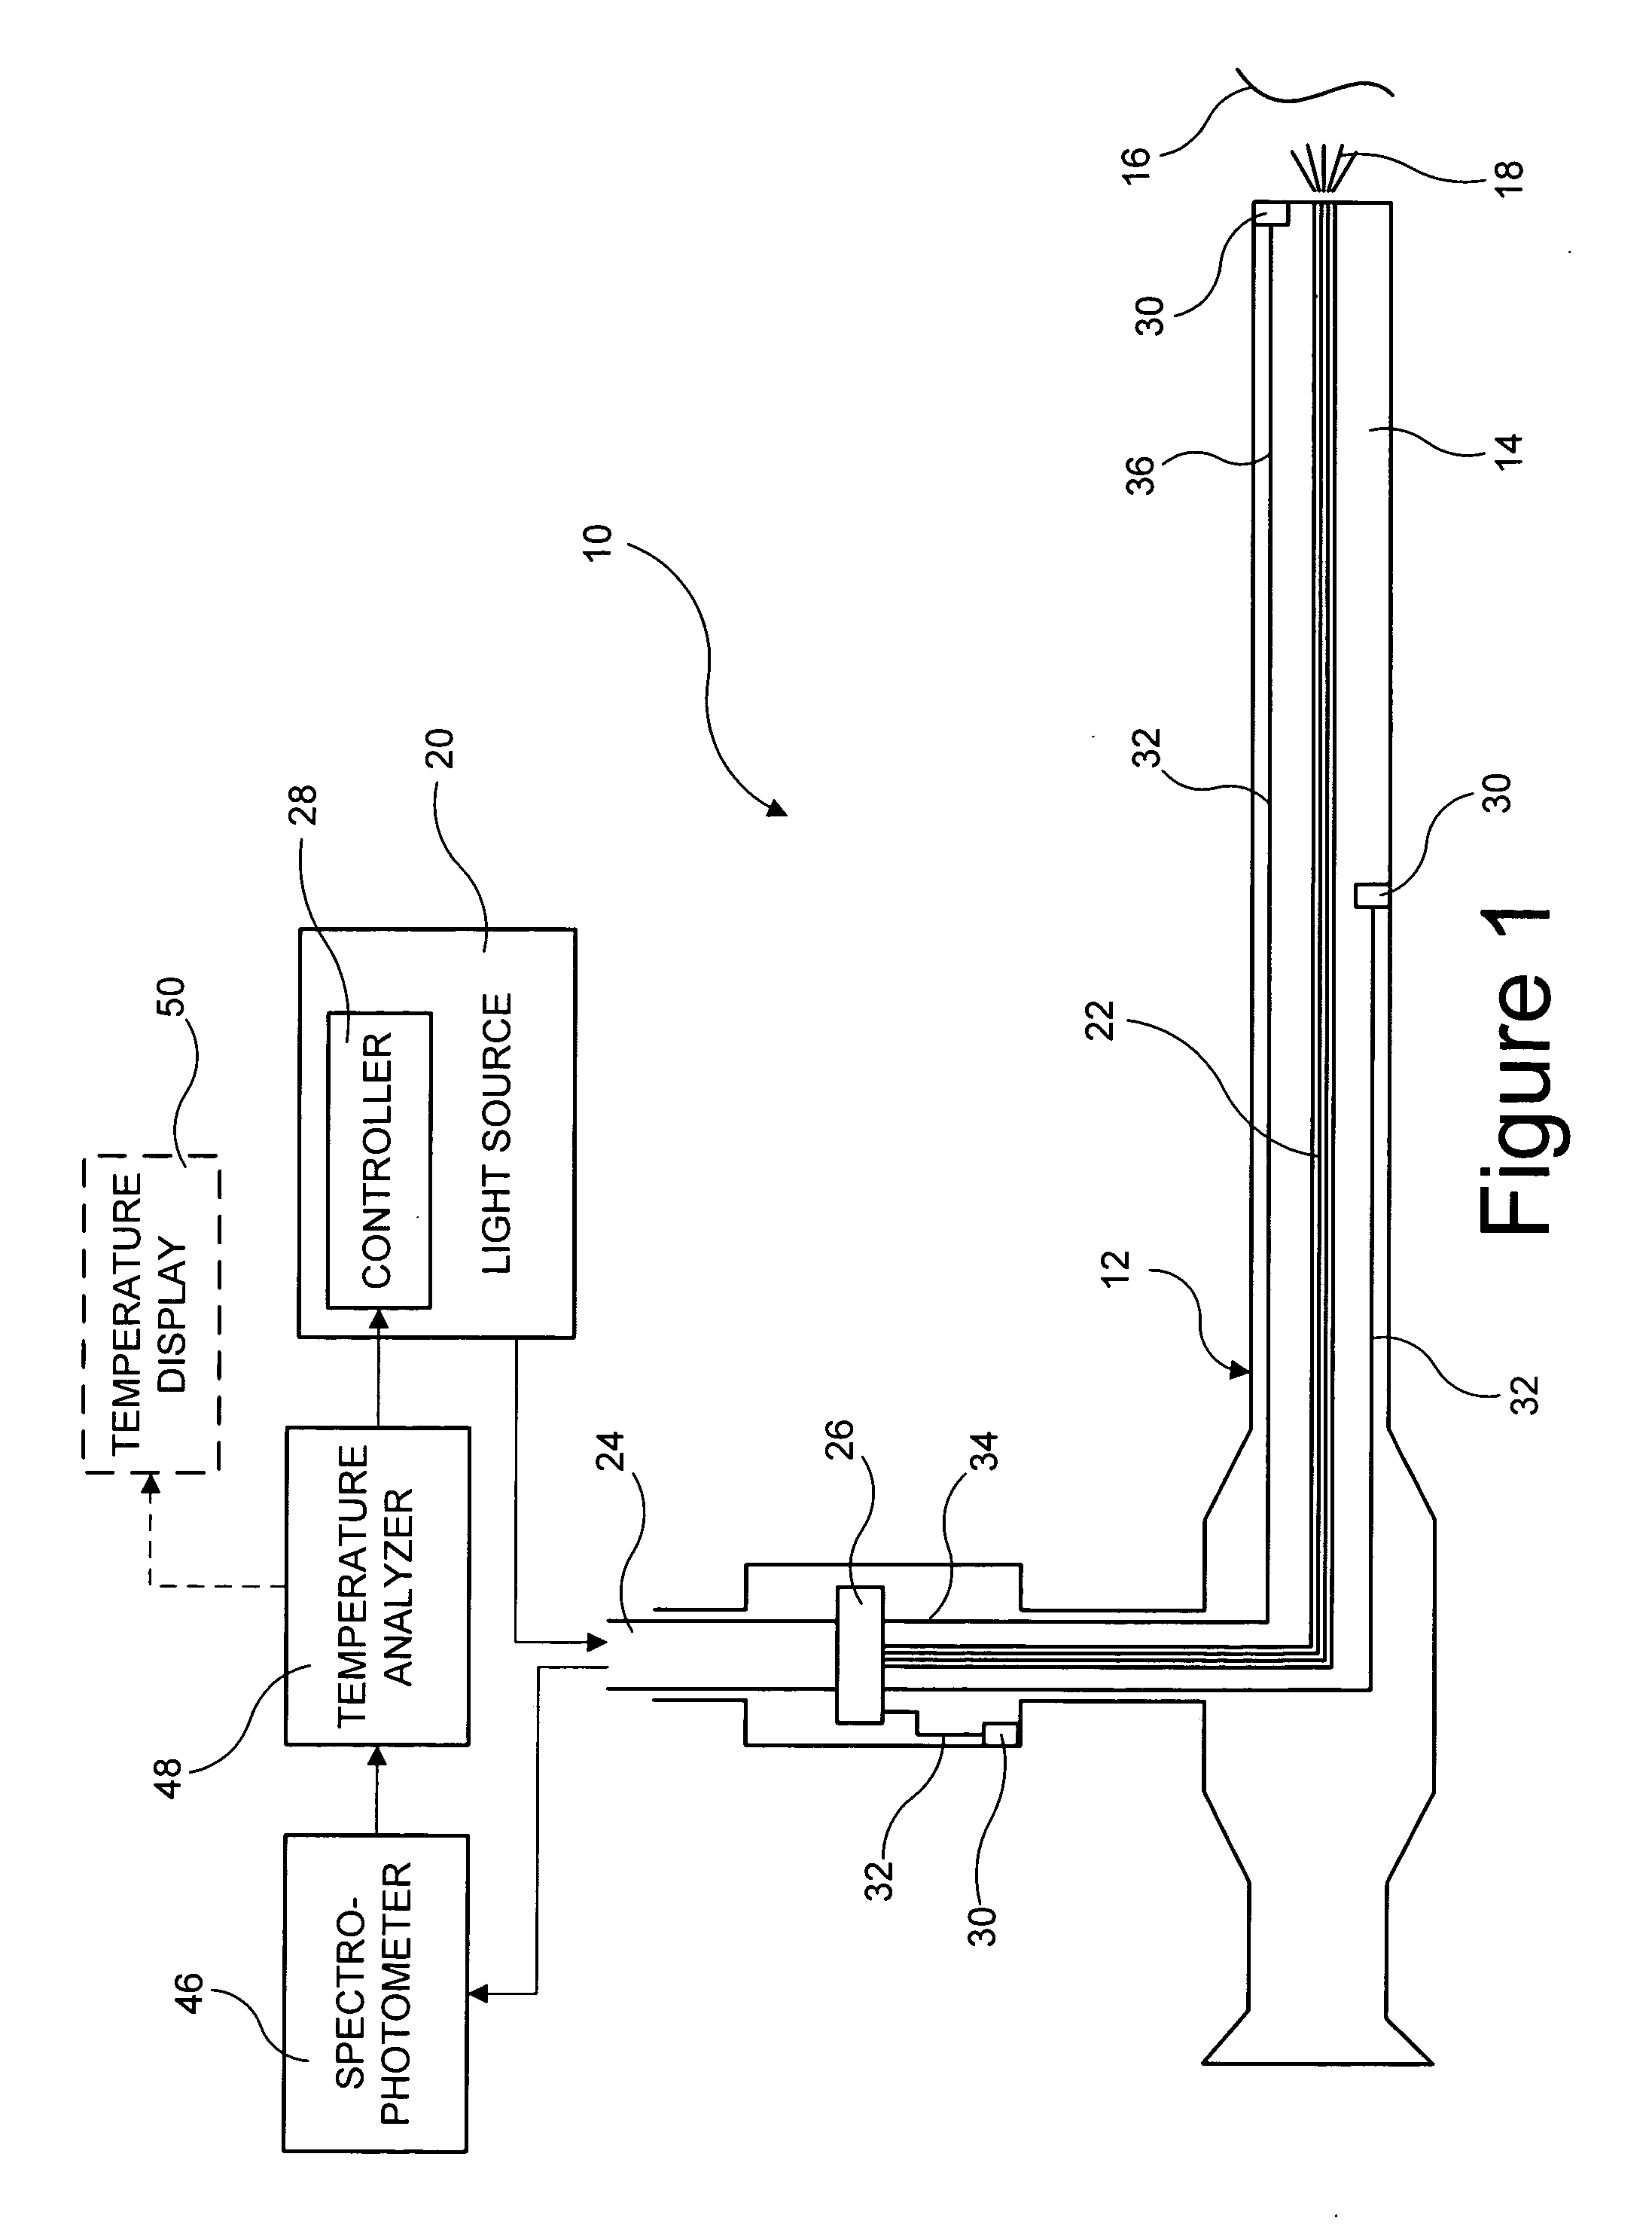 Endoscopic device with temperature based light source control